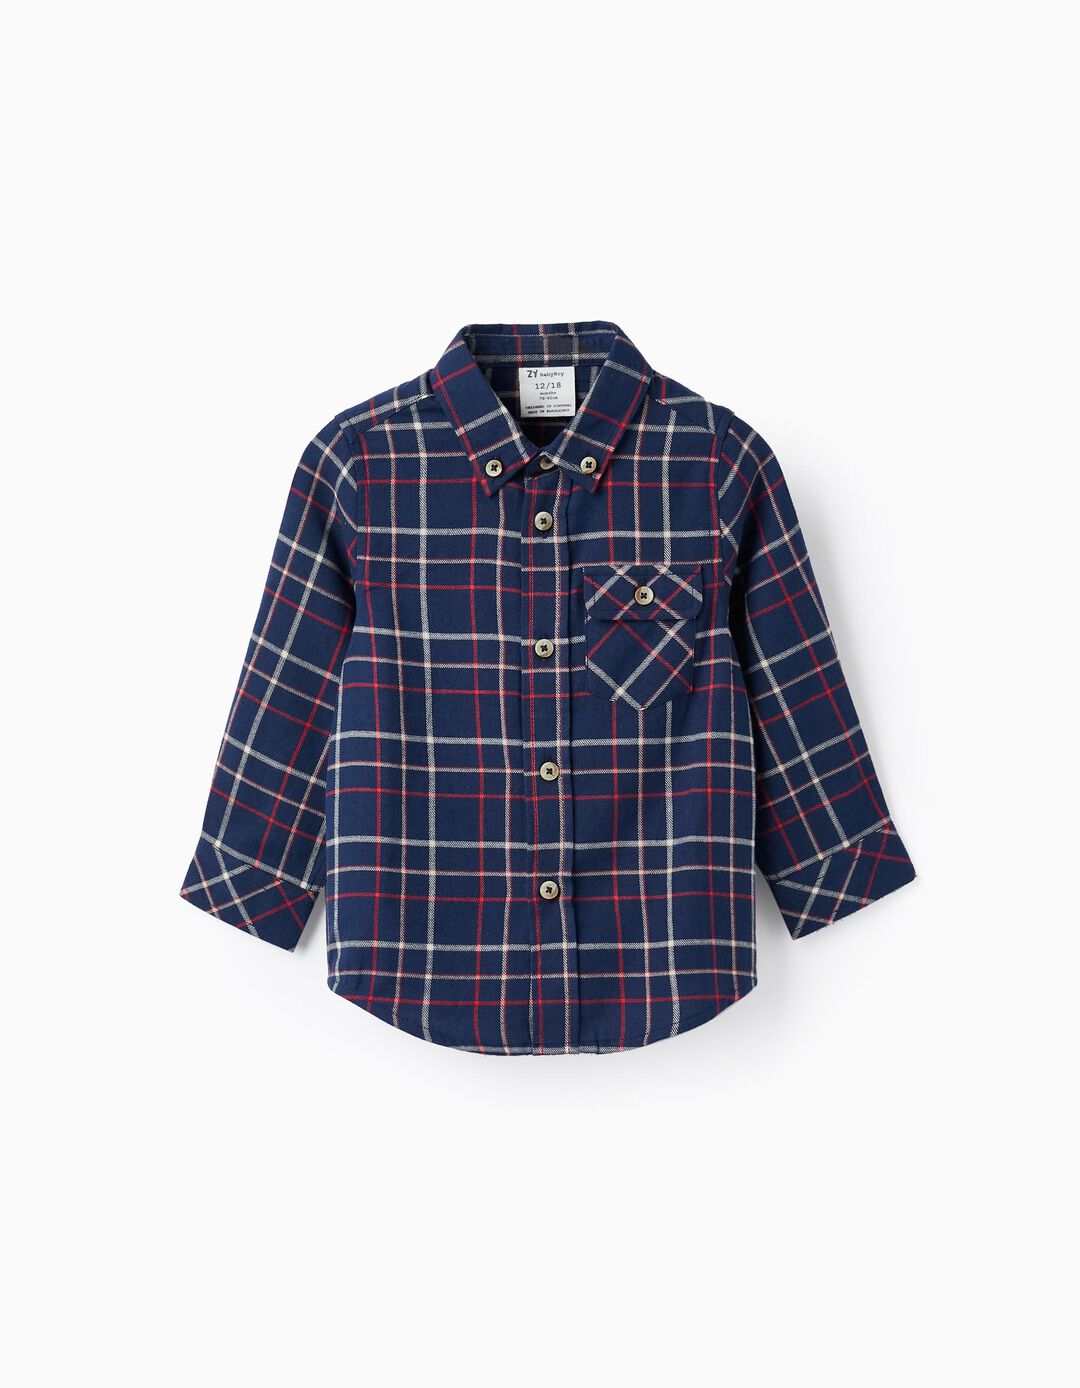 Checked Cotton Shirt for Baby Boys, Dark Blue/Red/White